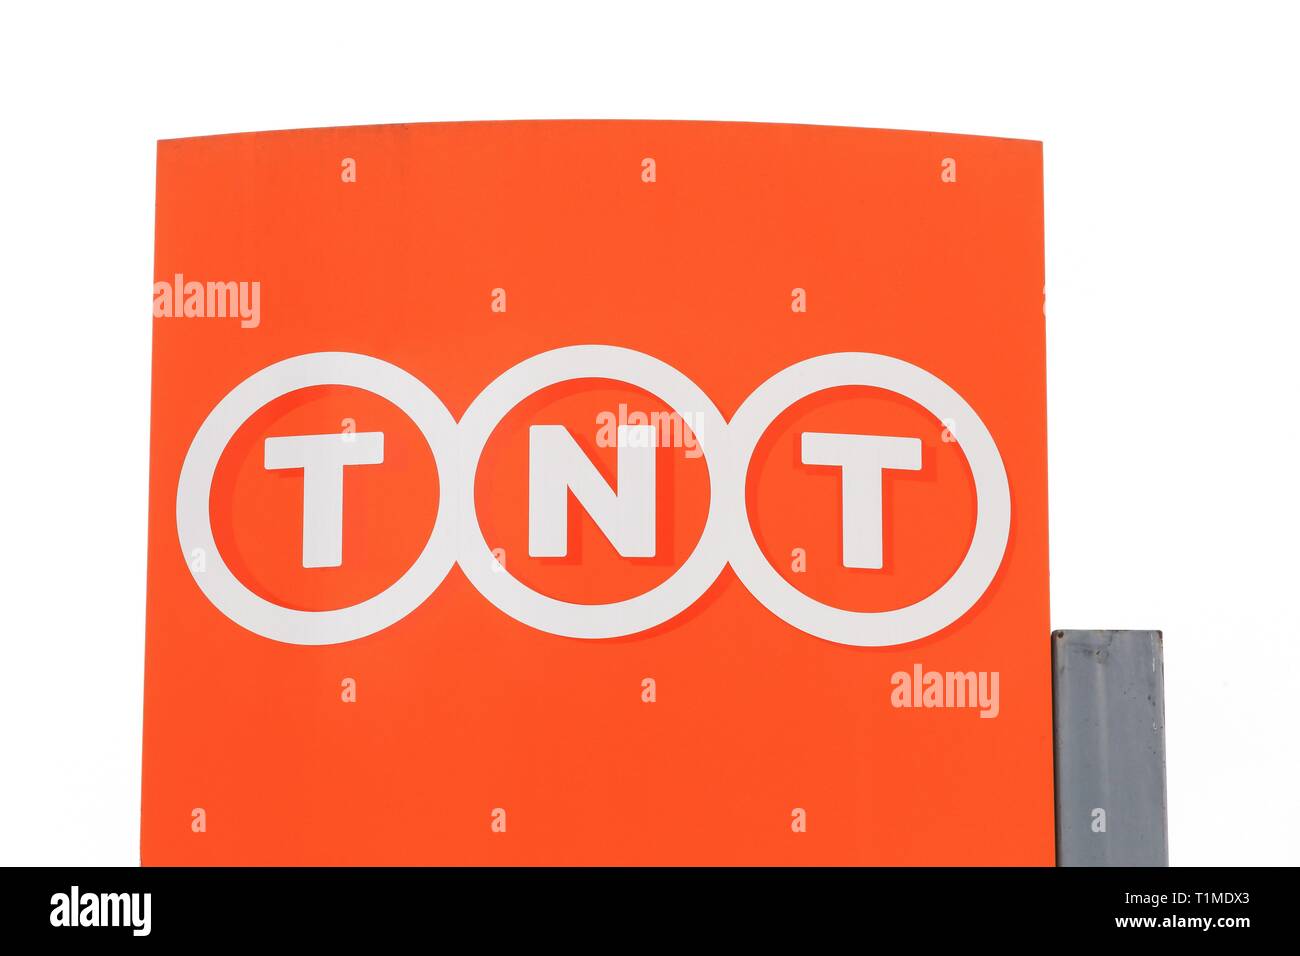 Lyon, France - January 20, 2019: TNT logo on a panel. TNT is an international express, mail delivery and logistics services company Stock Photo